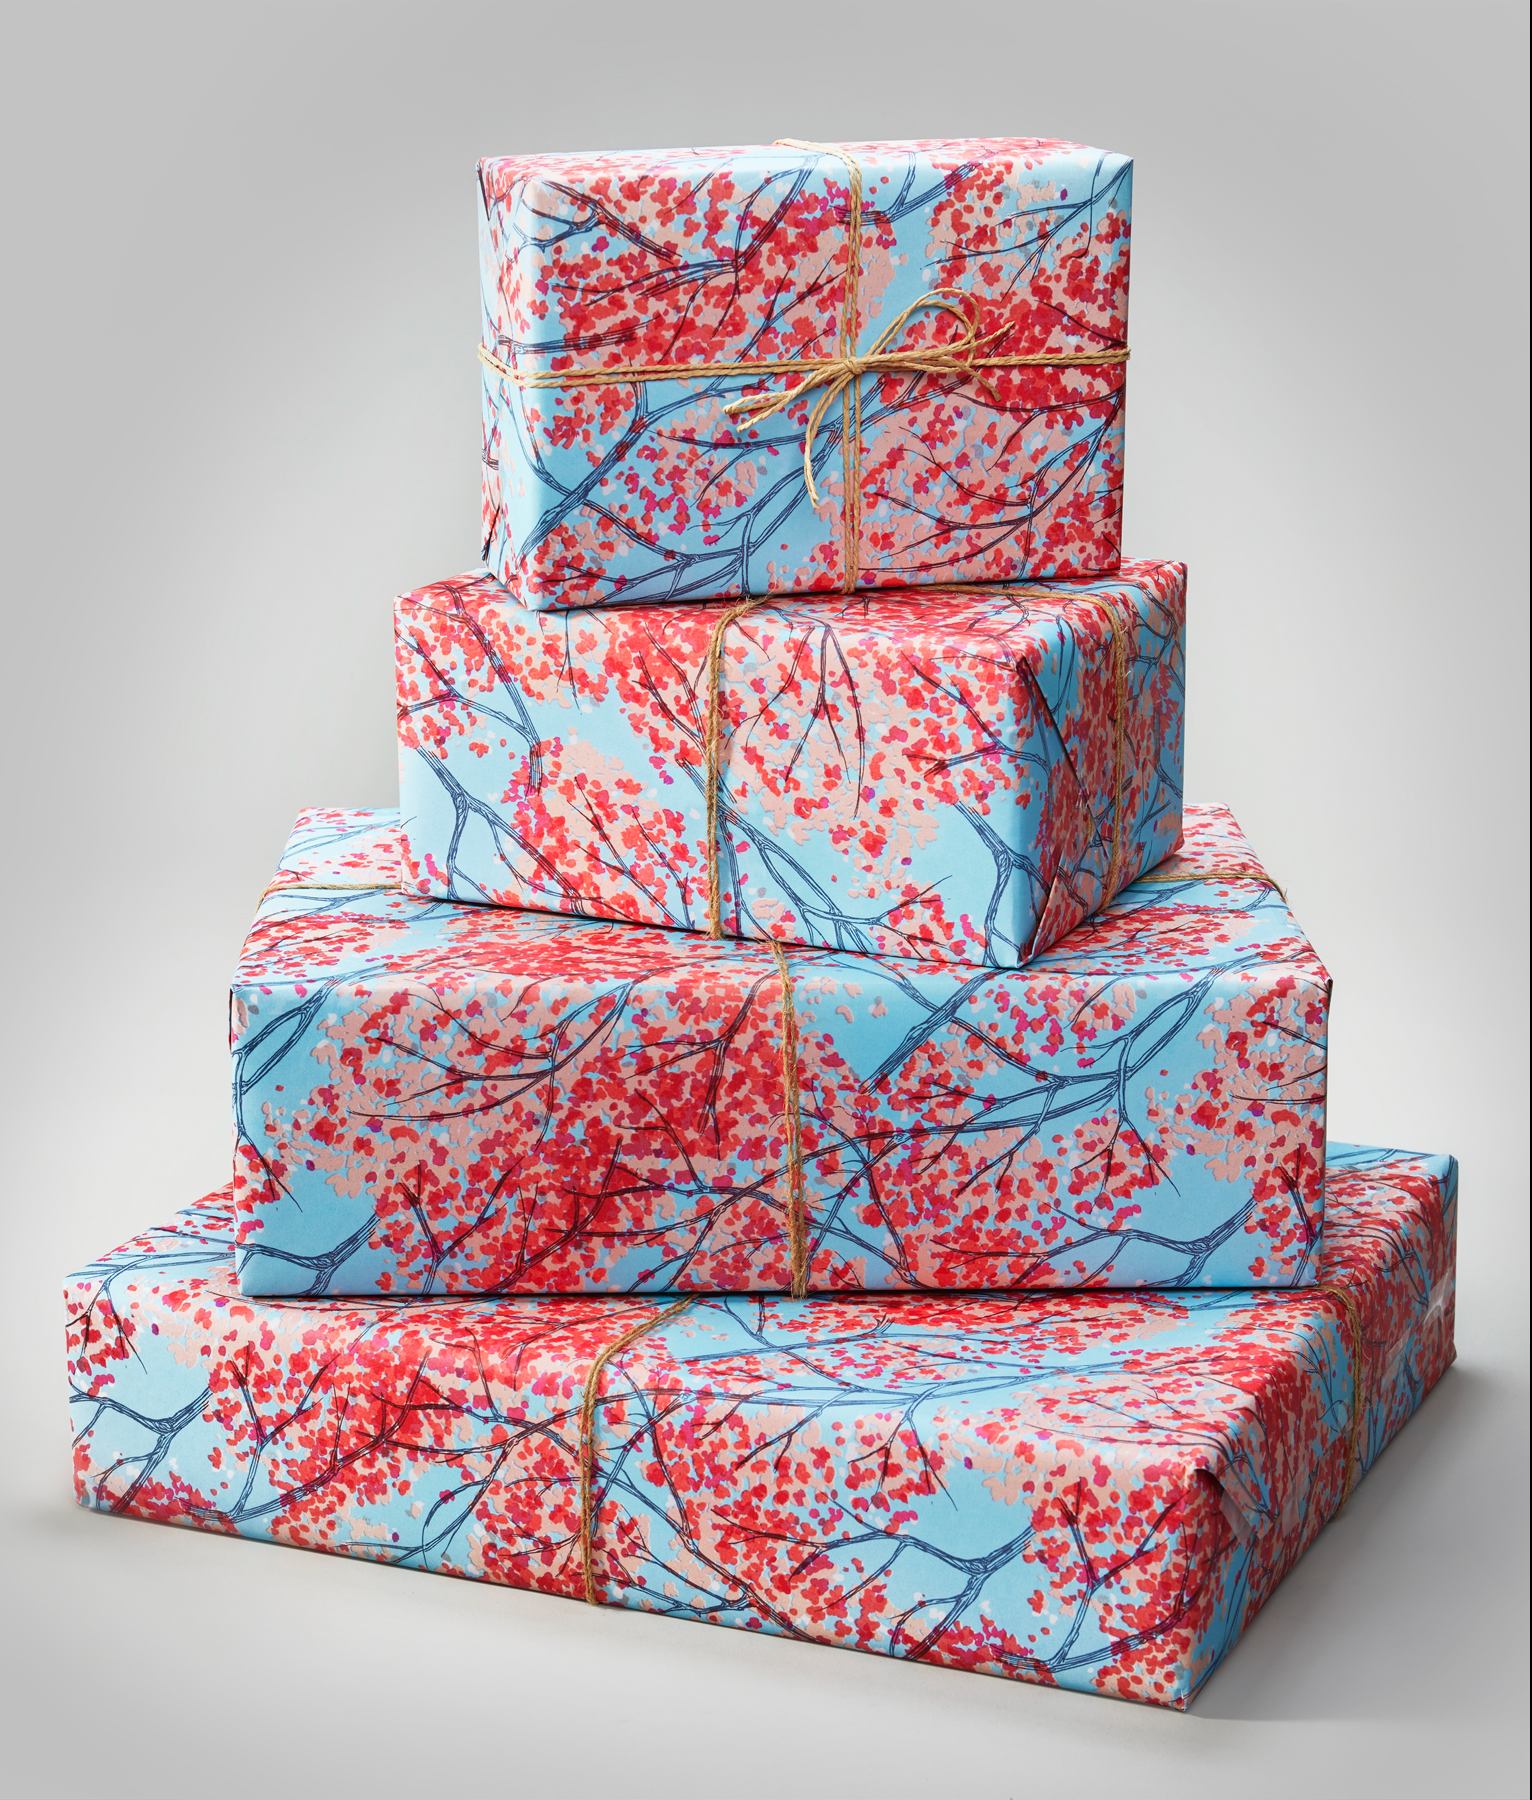 Wrapping Paper,Tissue,Gift Box China Wrapping Paper,Paper Box